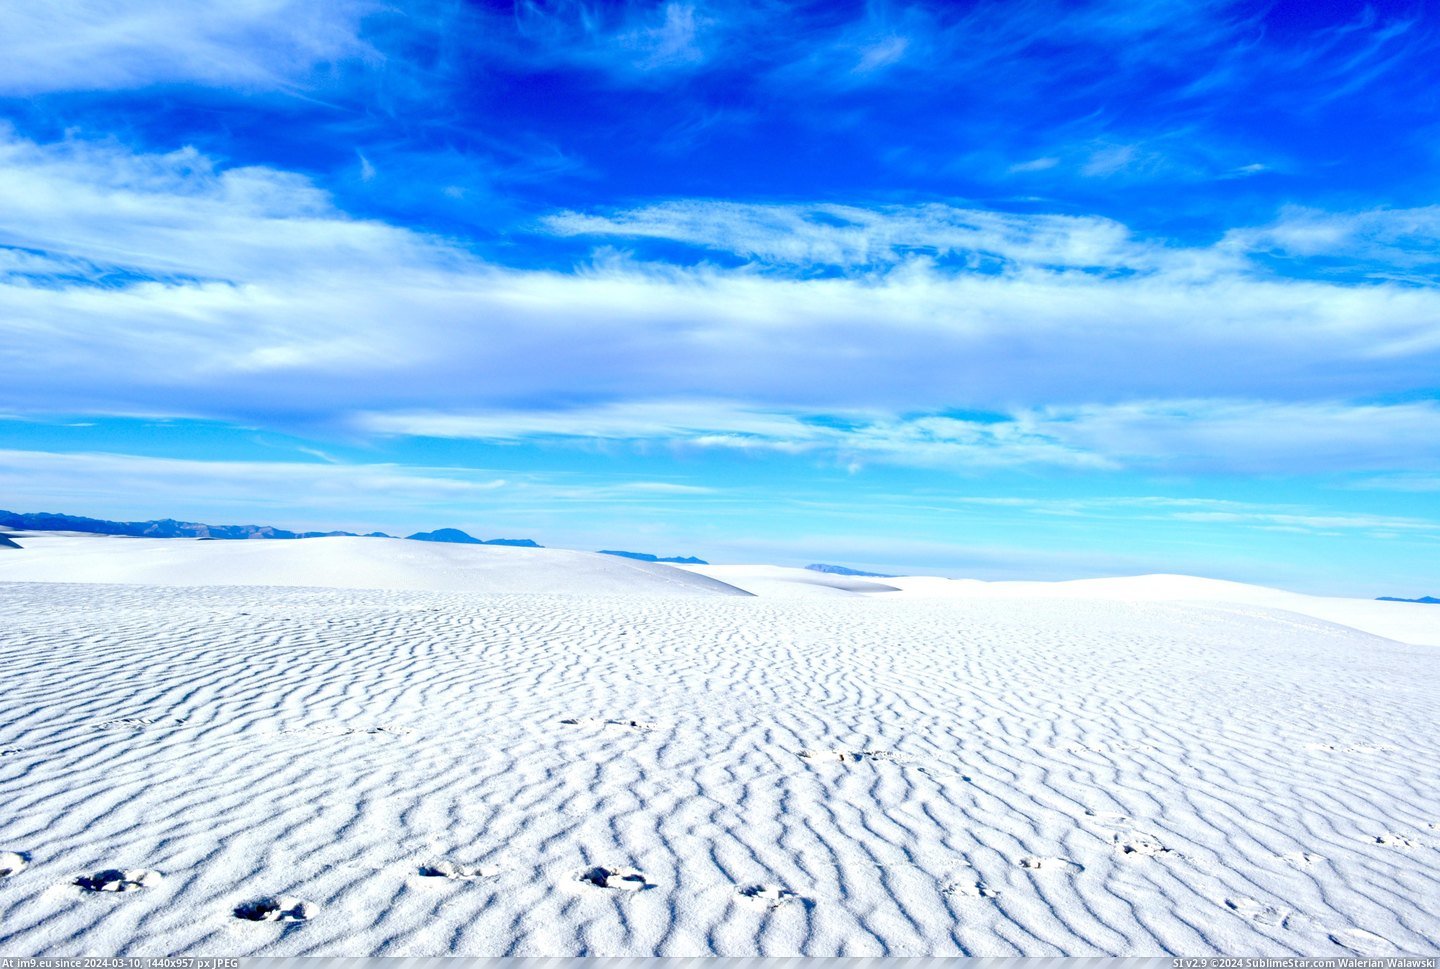 #One #White #National #Mexico #Sands #Exploring #Gems #America #Hidden #Monument [Earthporn] I have been exploring America's hidden gems lately. This one is taken in White Sands National Monument, New Mexico.  Pic. (Image of album My r/EARTHPORN favs))